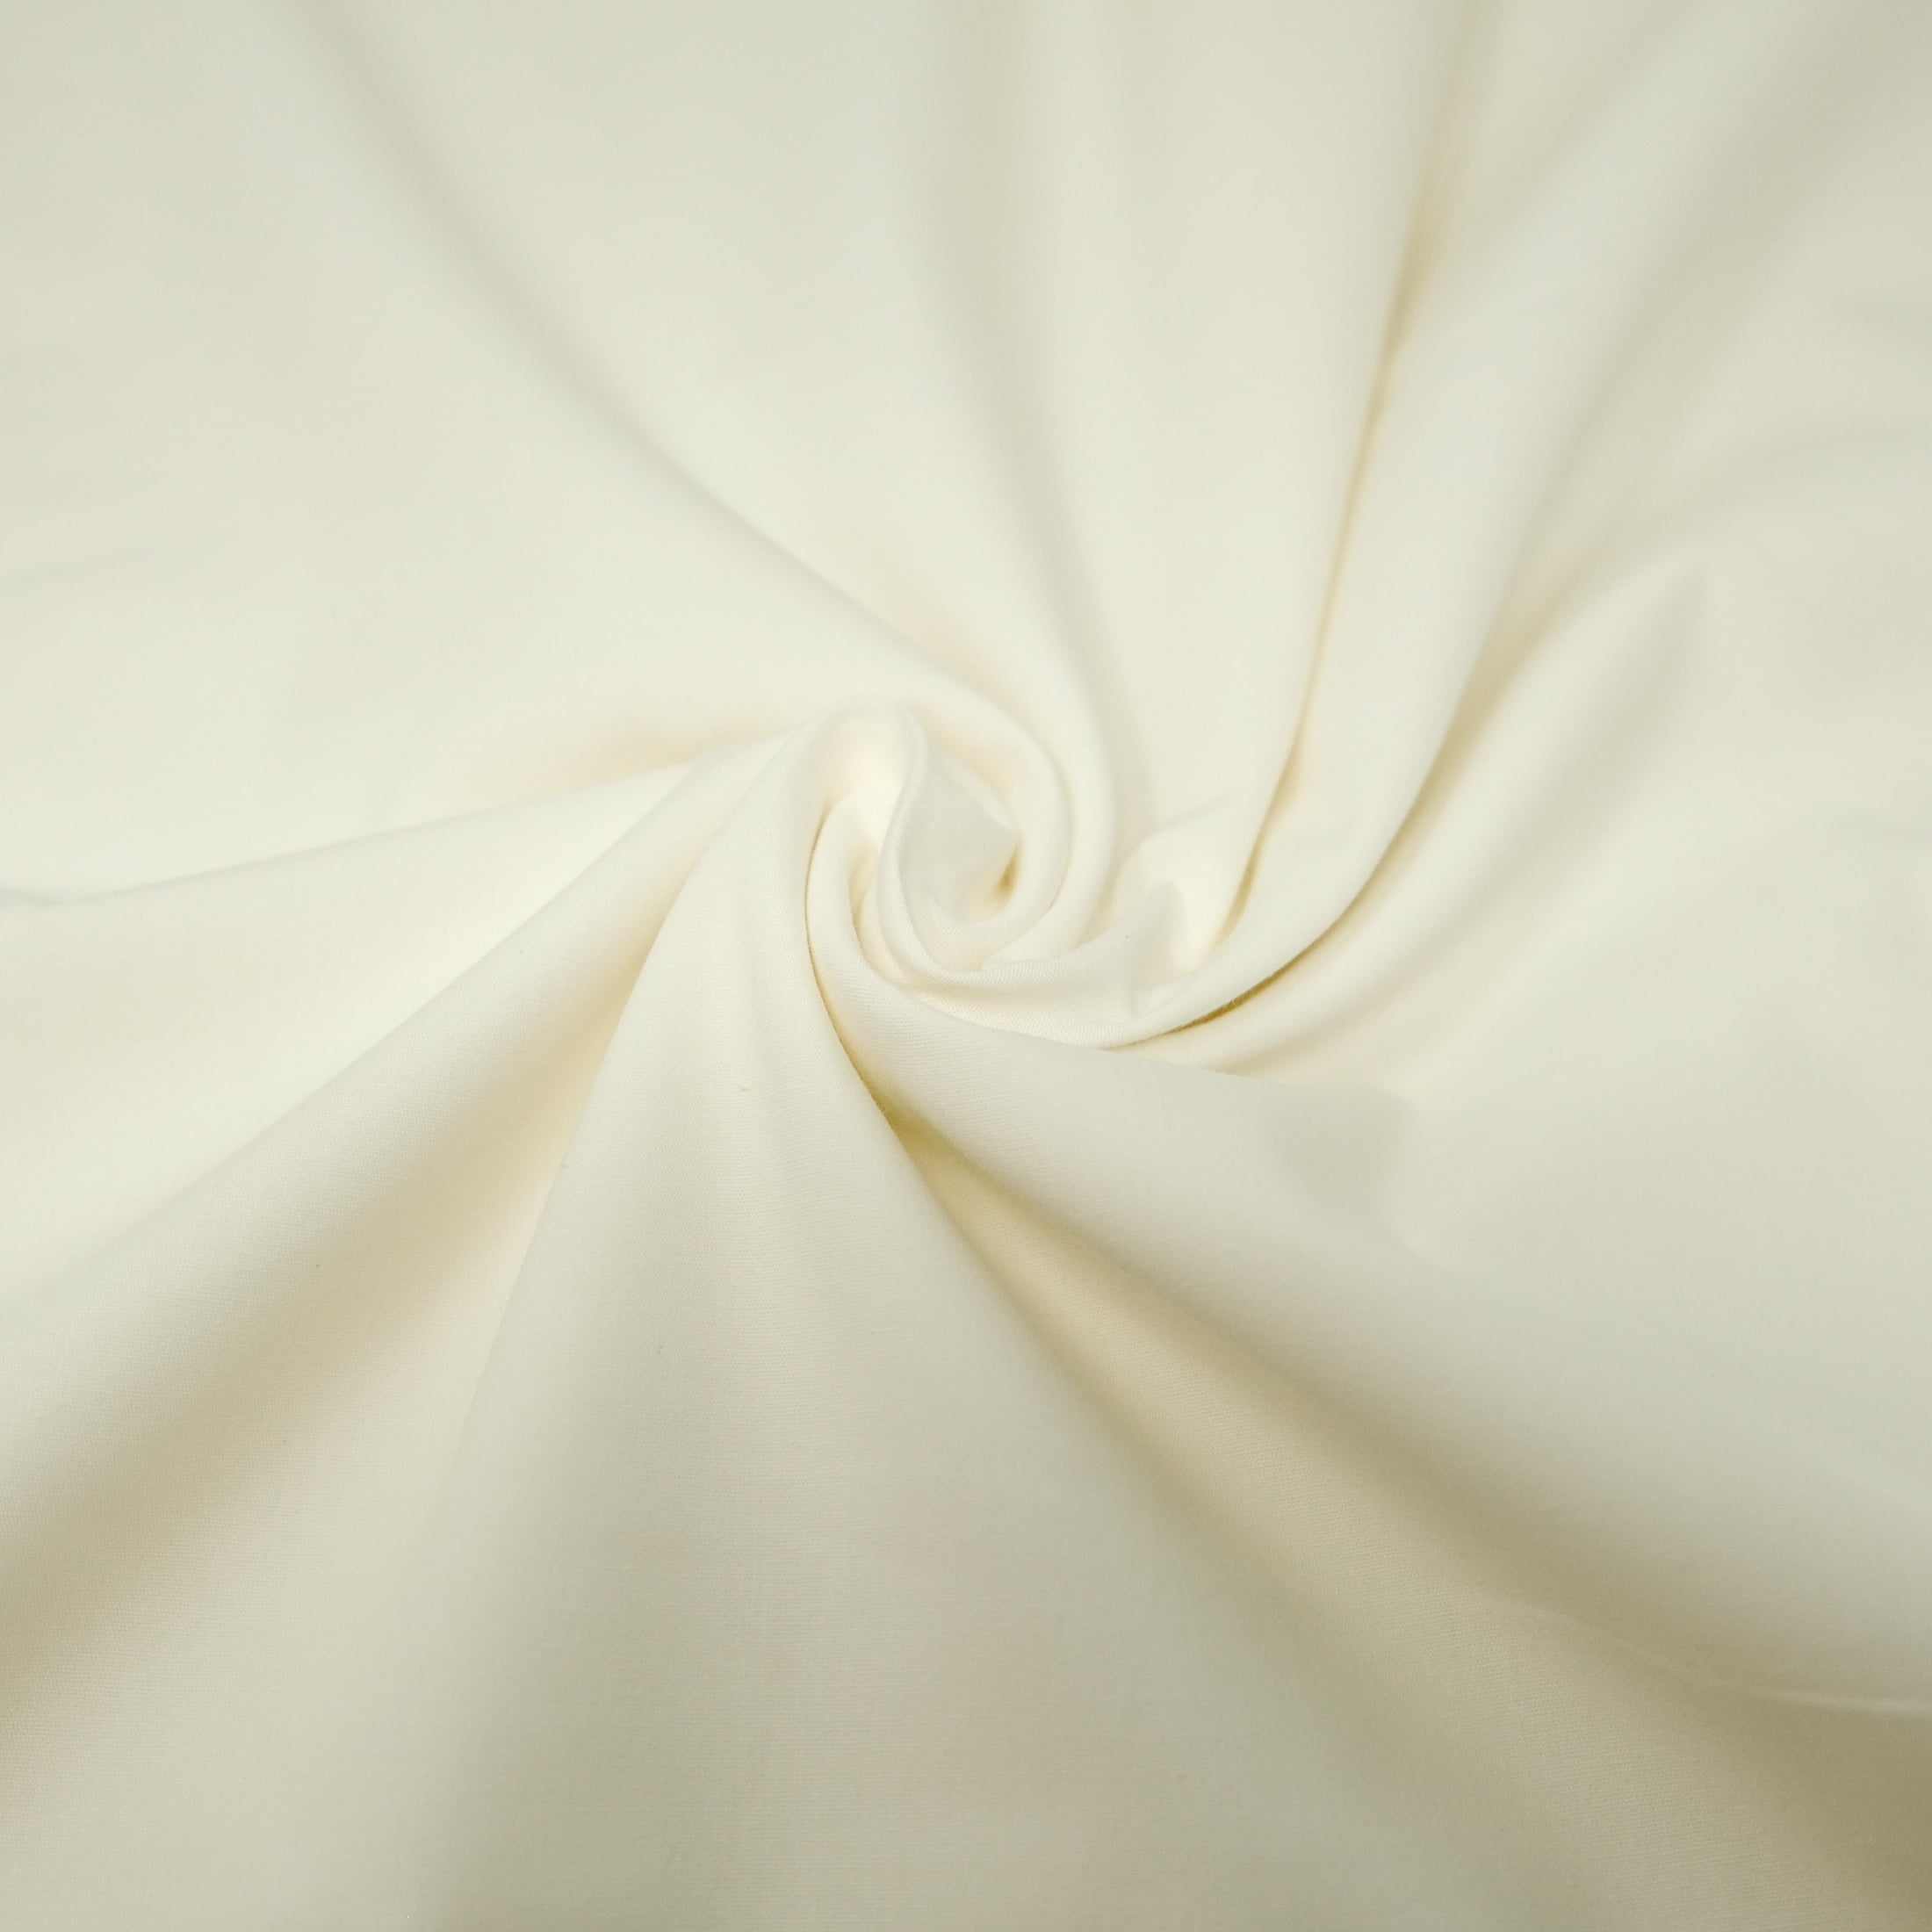 Ivory Solid Felt Fabric / 72 Wide / Sold by The Yard (FB)